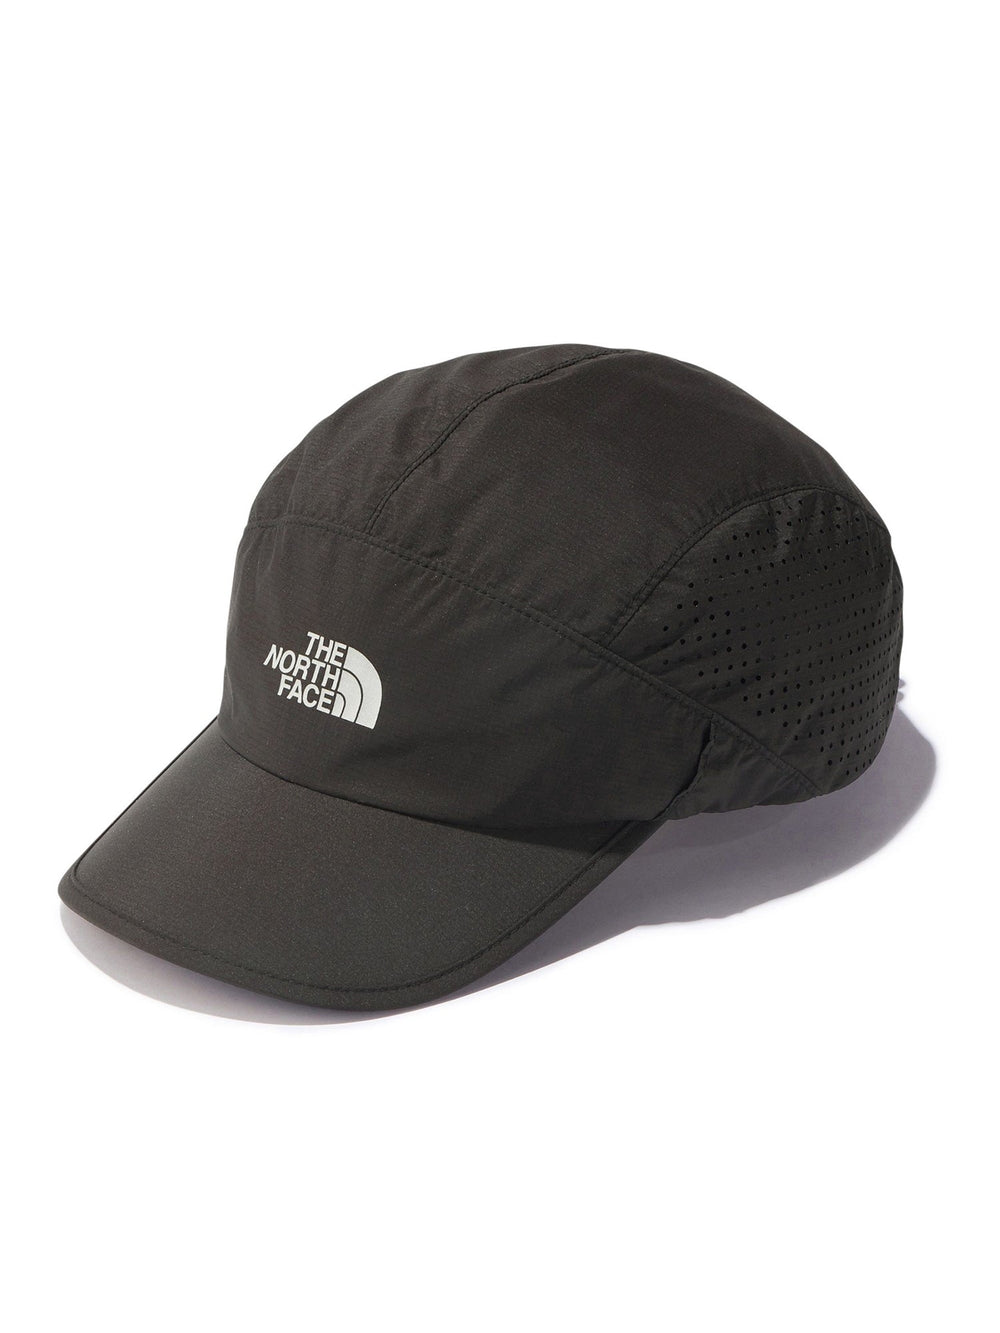 THE NORTH FACE] Swallowtail Cap / North Face Unisex Outdoor